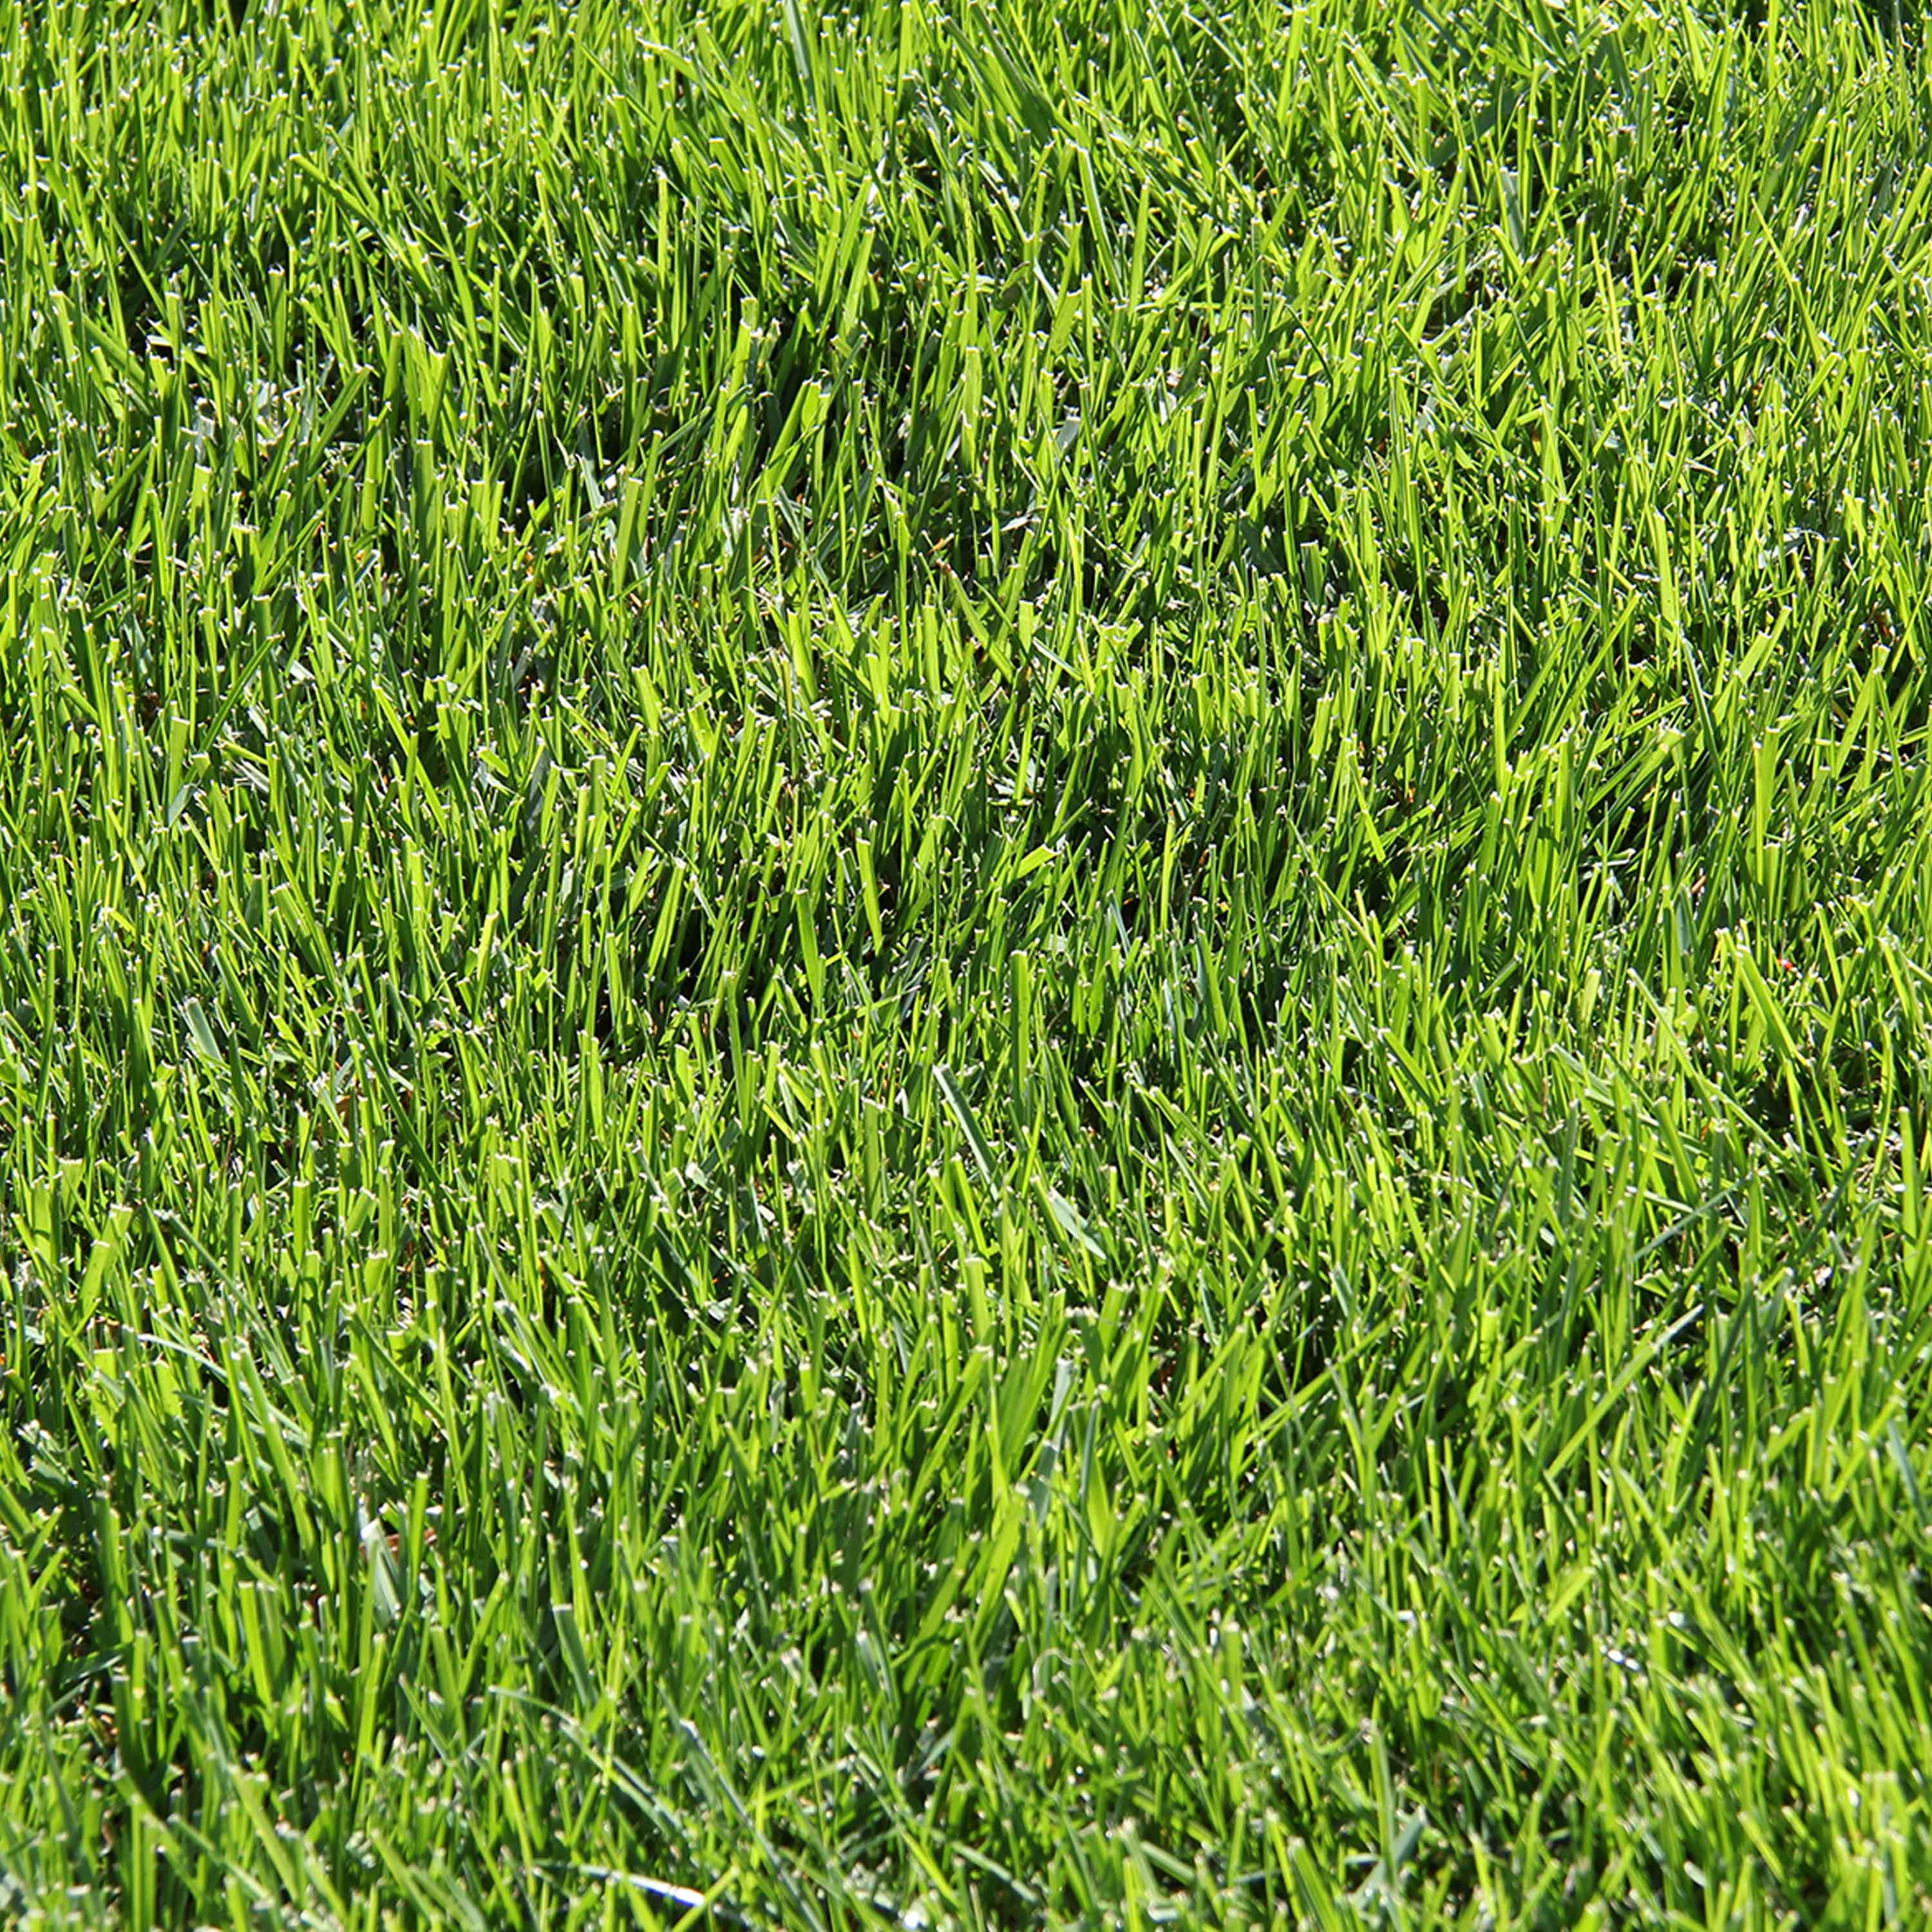 Profesional base as pictured 30cm x 21cm ,7/26mm tall grass, wild grass  DP-w04As